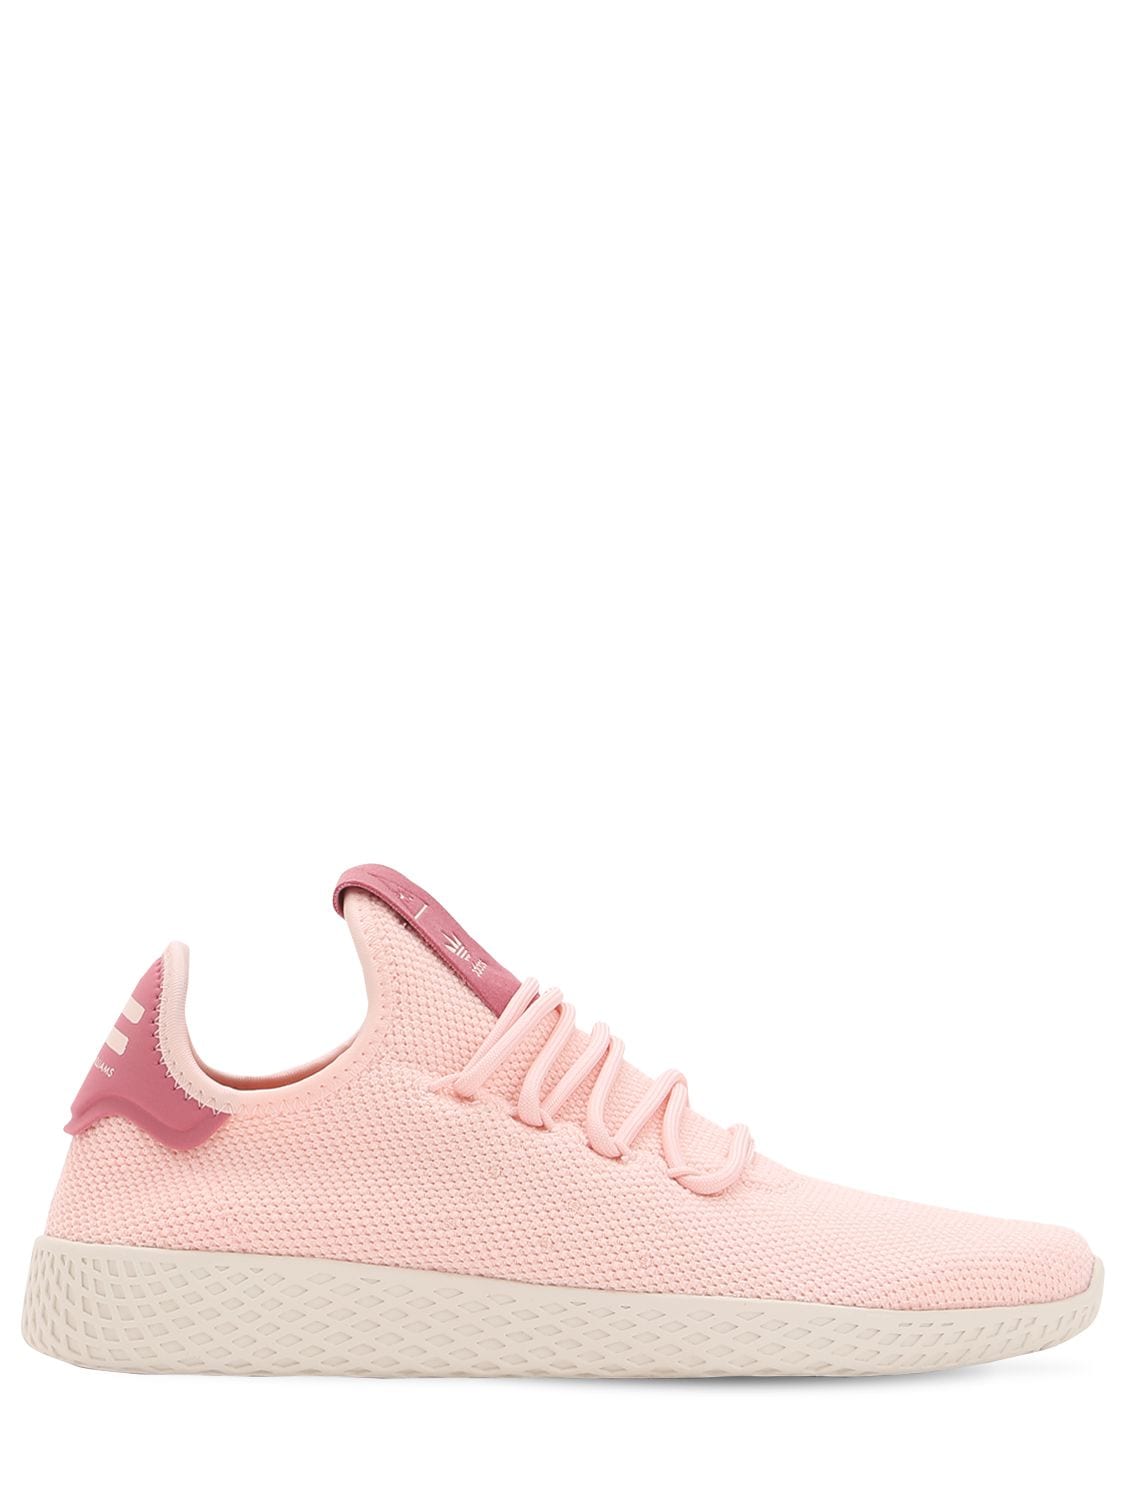 Adidas Originals By Pharrell Williams Pharrell Williams Knit Sneakers In Pink